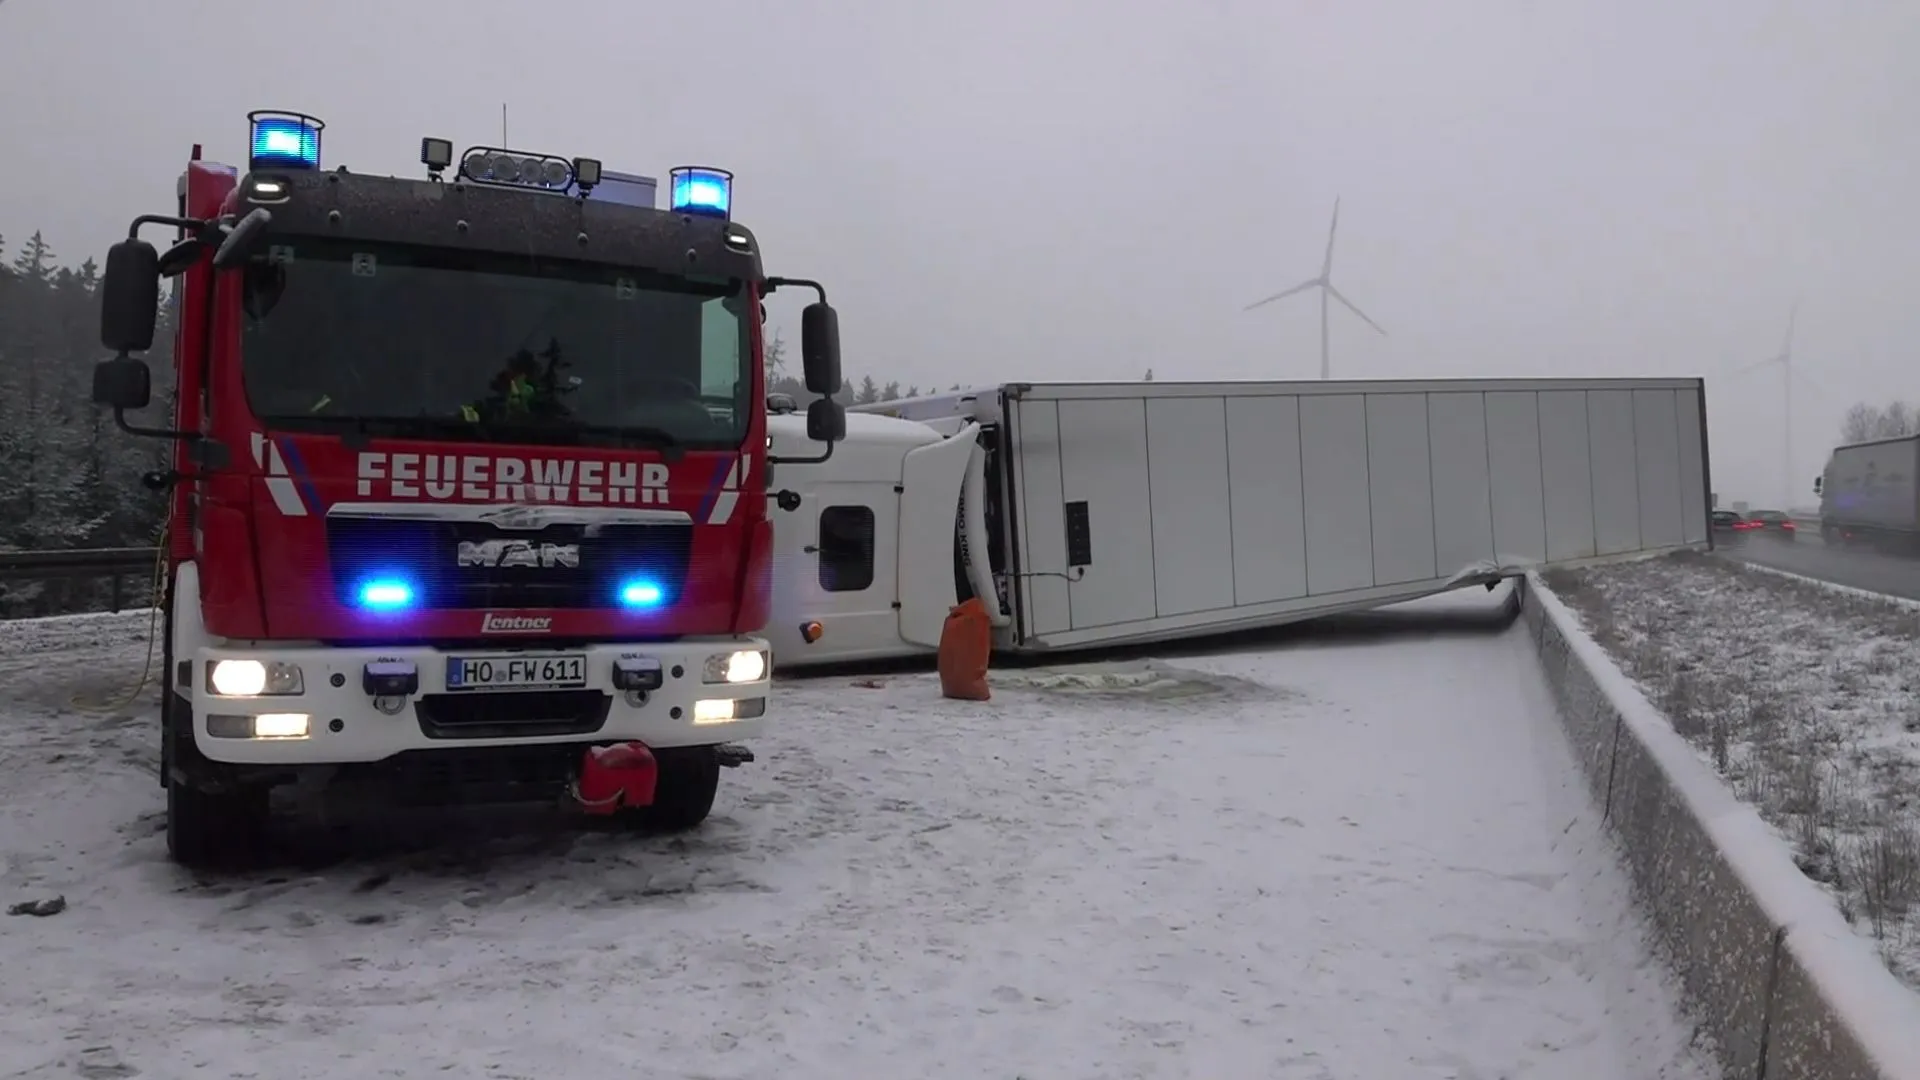 Truck overturned on A9: Snow and lack of emergency lane make it difficult for rescue teams to reach the scene